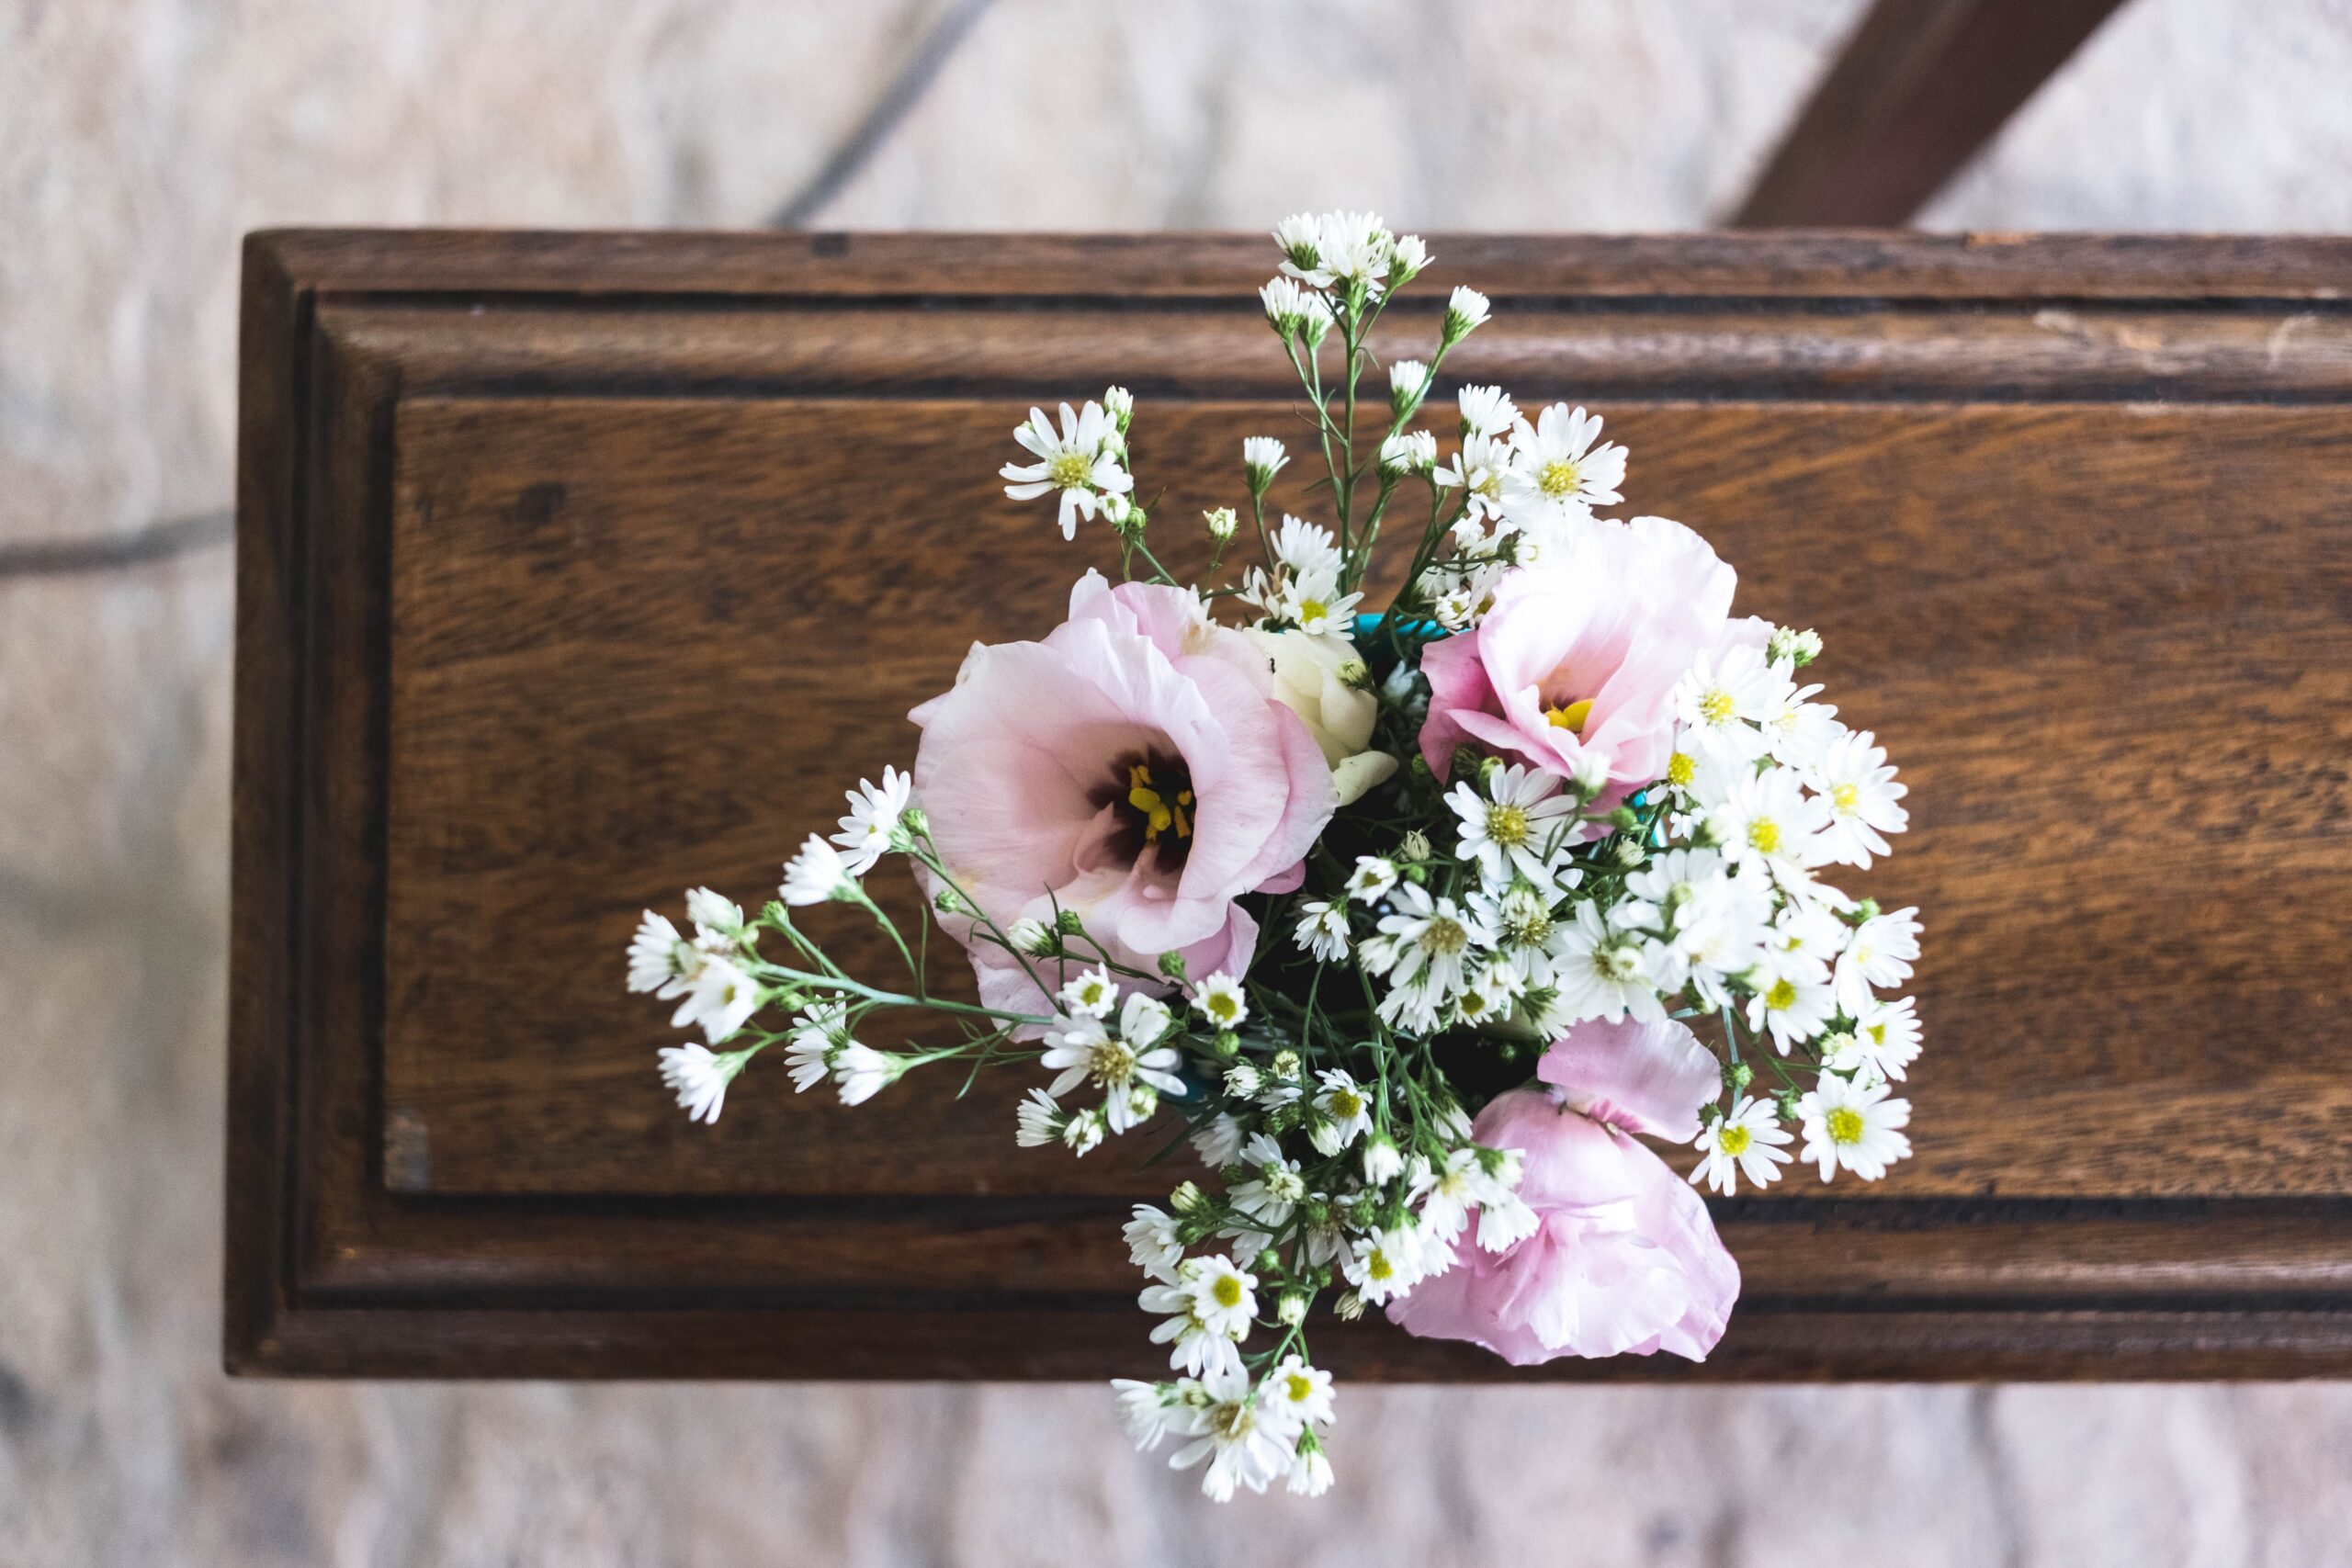 wood-coffin-with-flowers